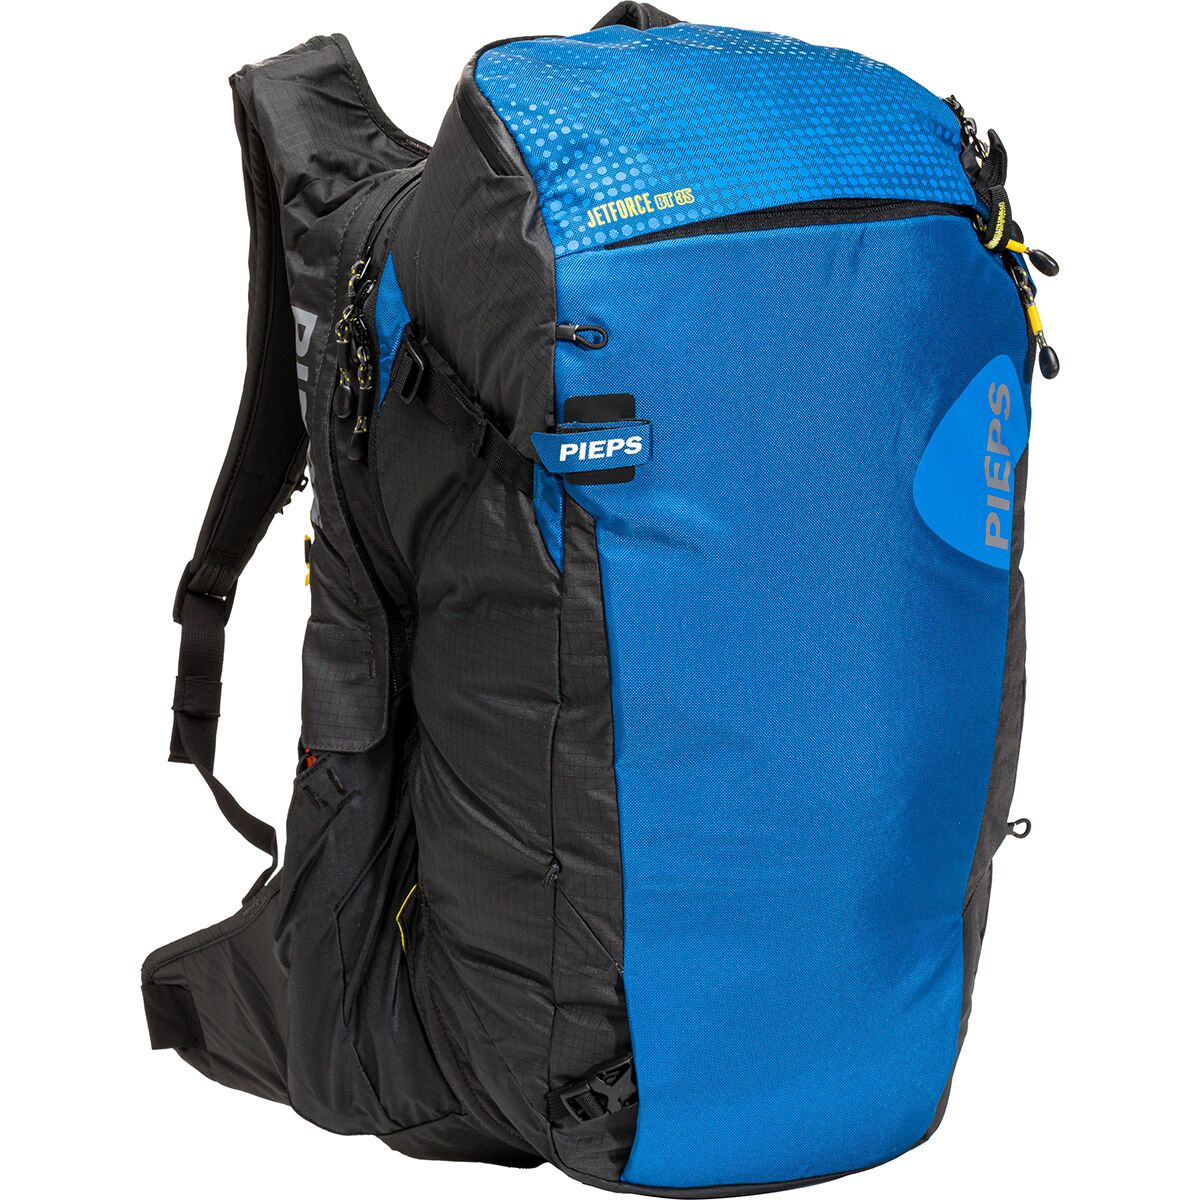 Pieps Jetforce BT 35L Avalanche Airbag Backpack REPO Blue